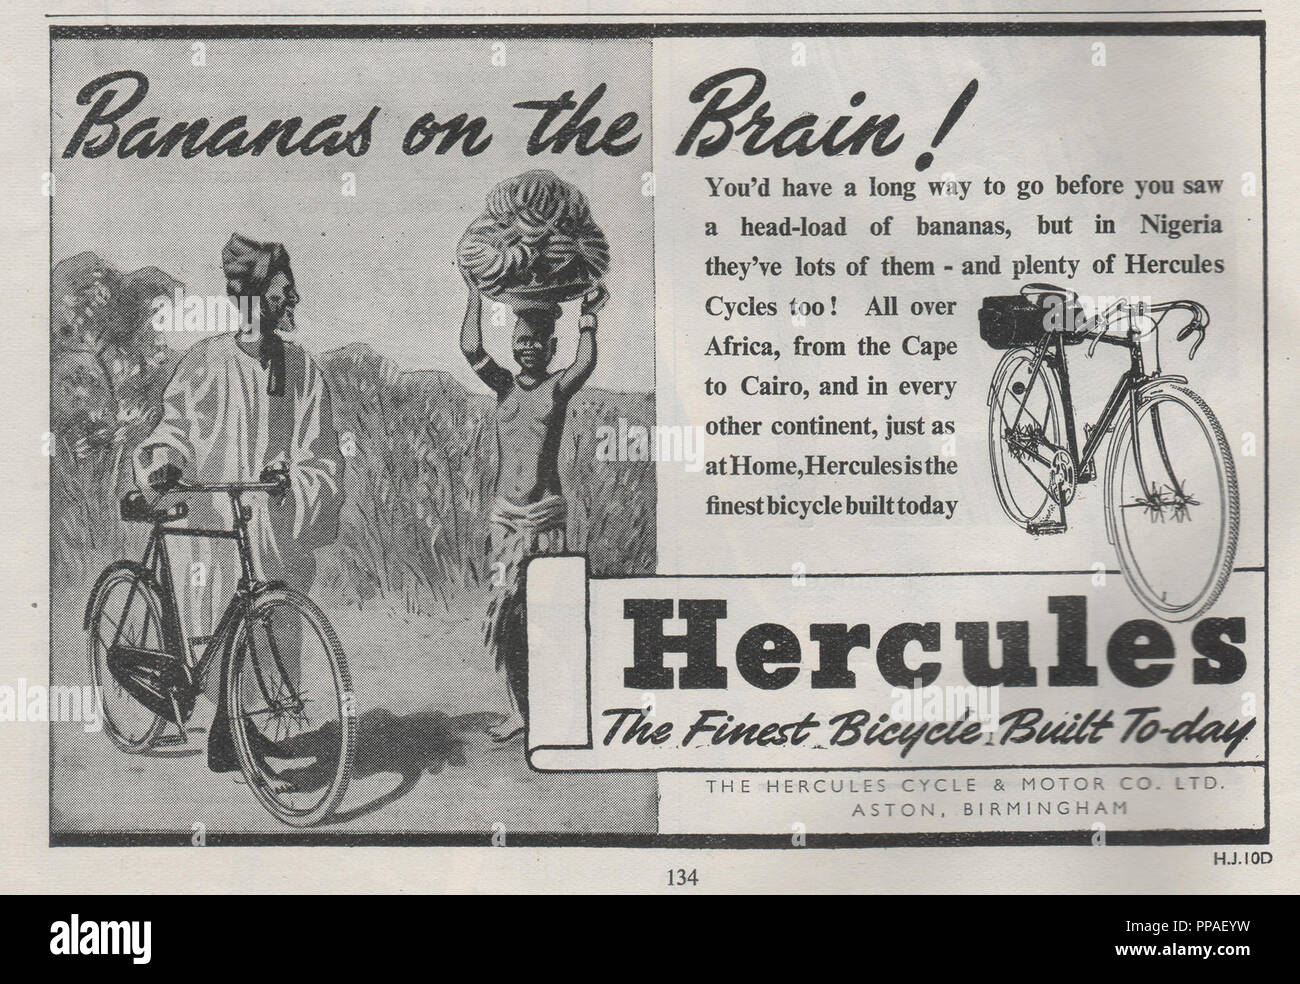 Vintage magazine advert for Hercules Bicycles from dated April 1947. Hercules Cycle and Motor Company Limited was established in 1910 in Aston Birmingham and was eventually dissolved in 2003.  The advert features two African people one with bananas on their head with a strapline 'Bananas on the brain' Stock Photo